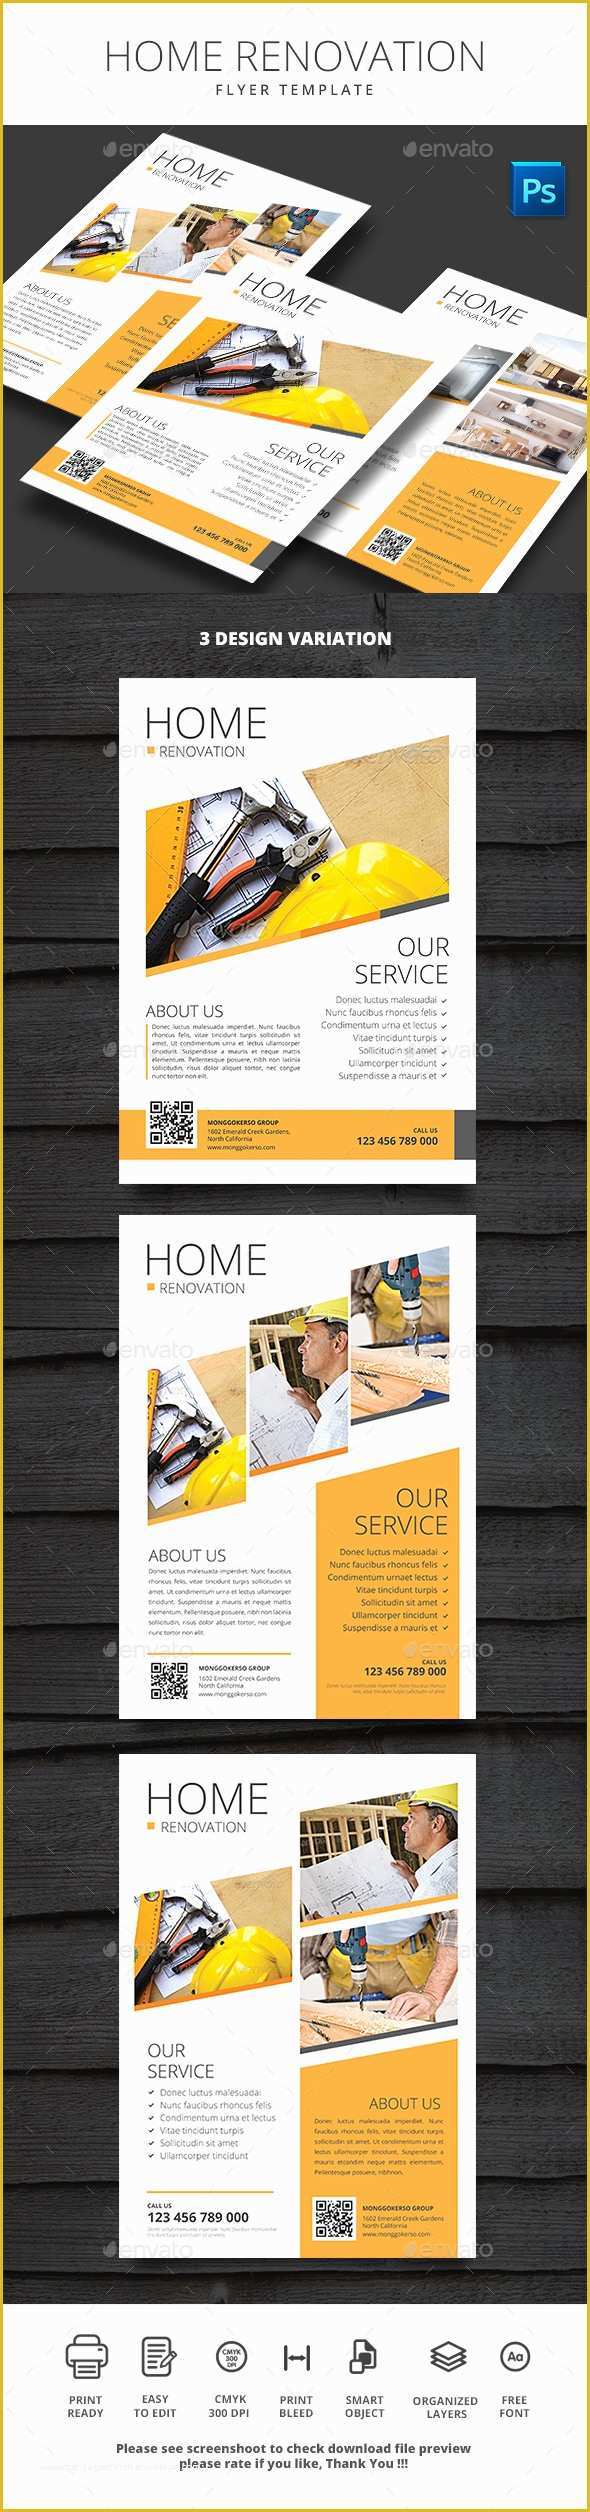 55 Home Improvement Flyer Template Free